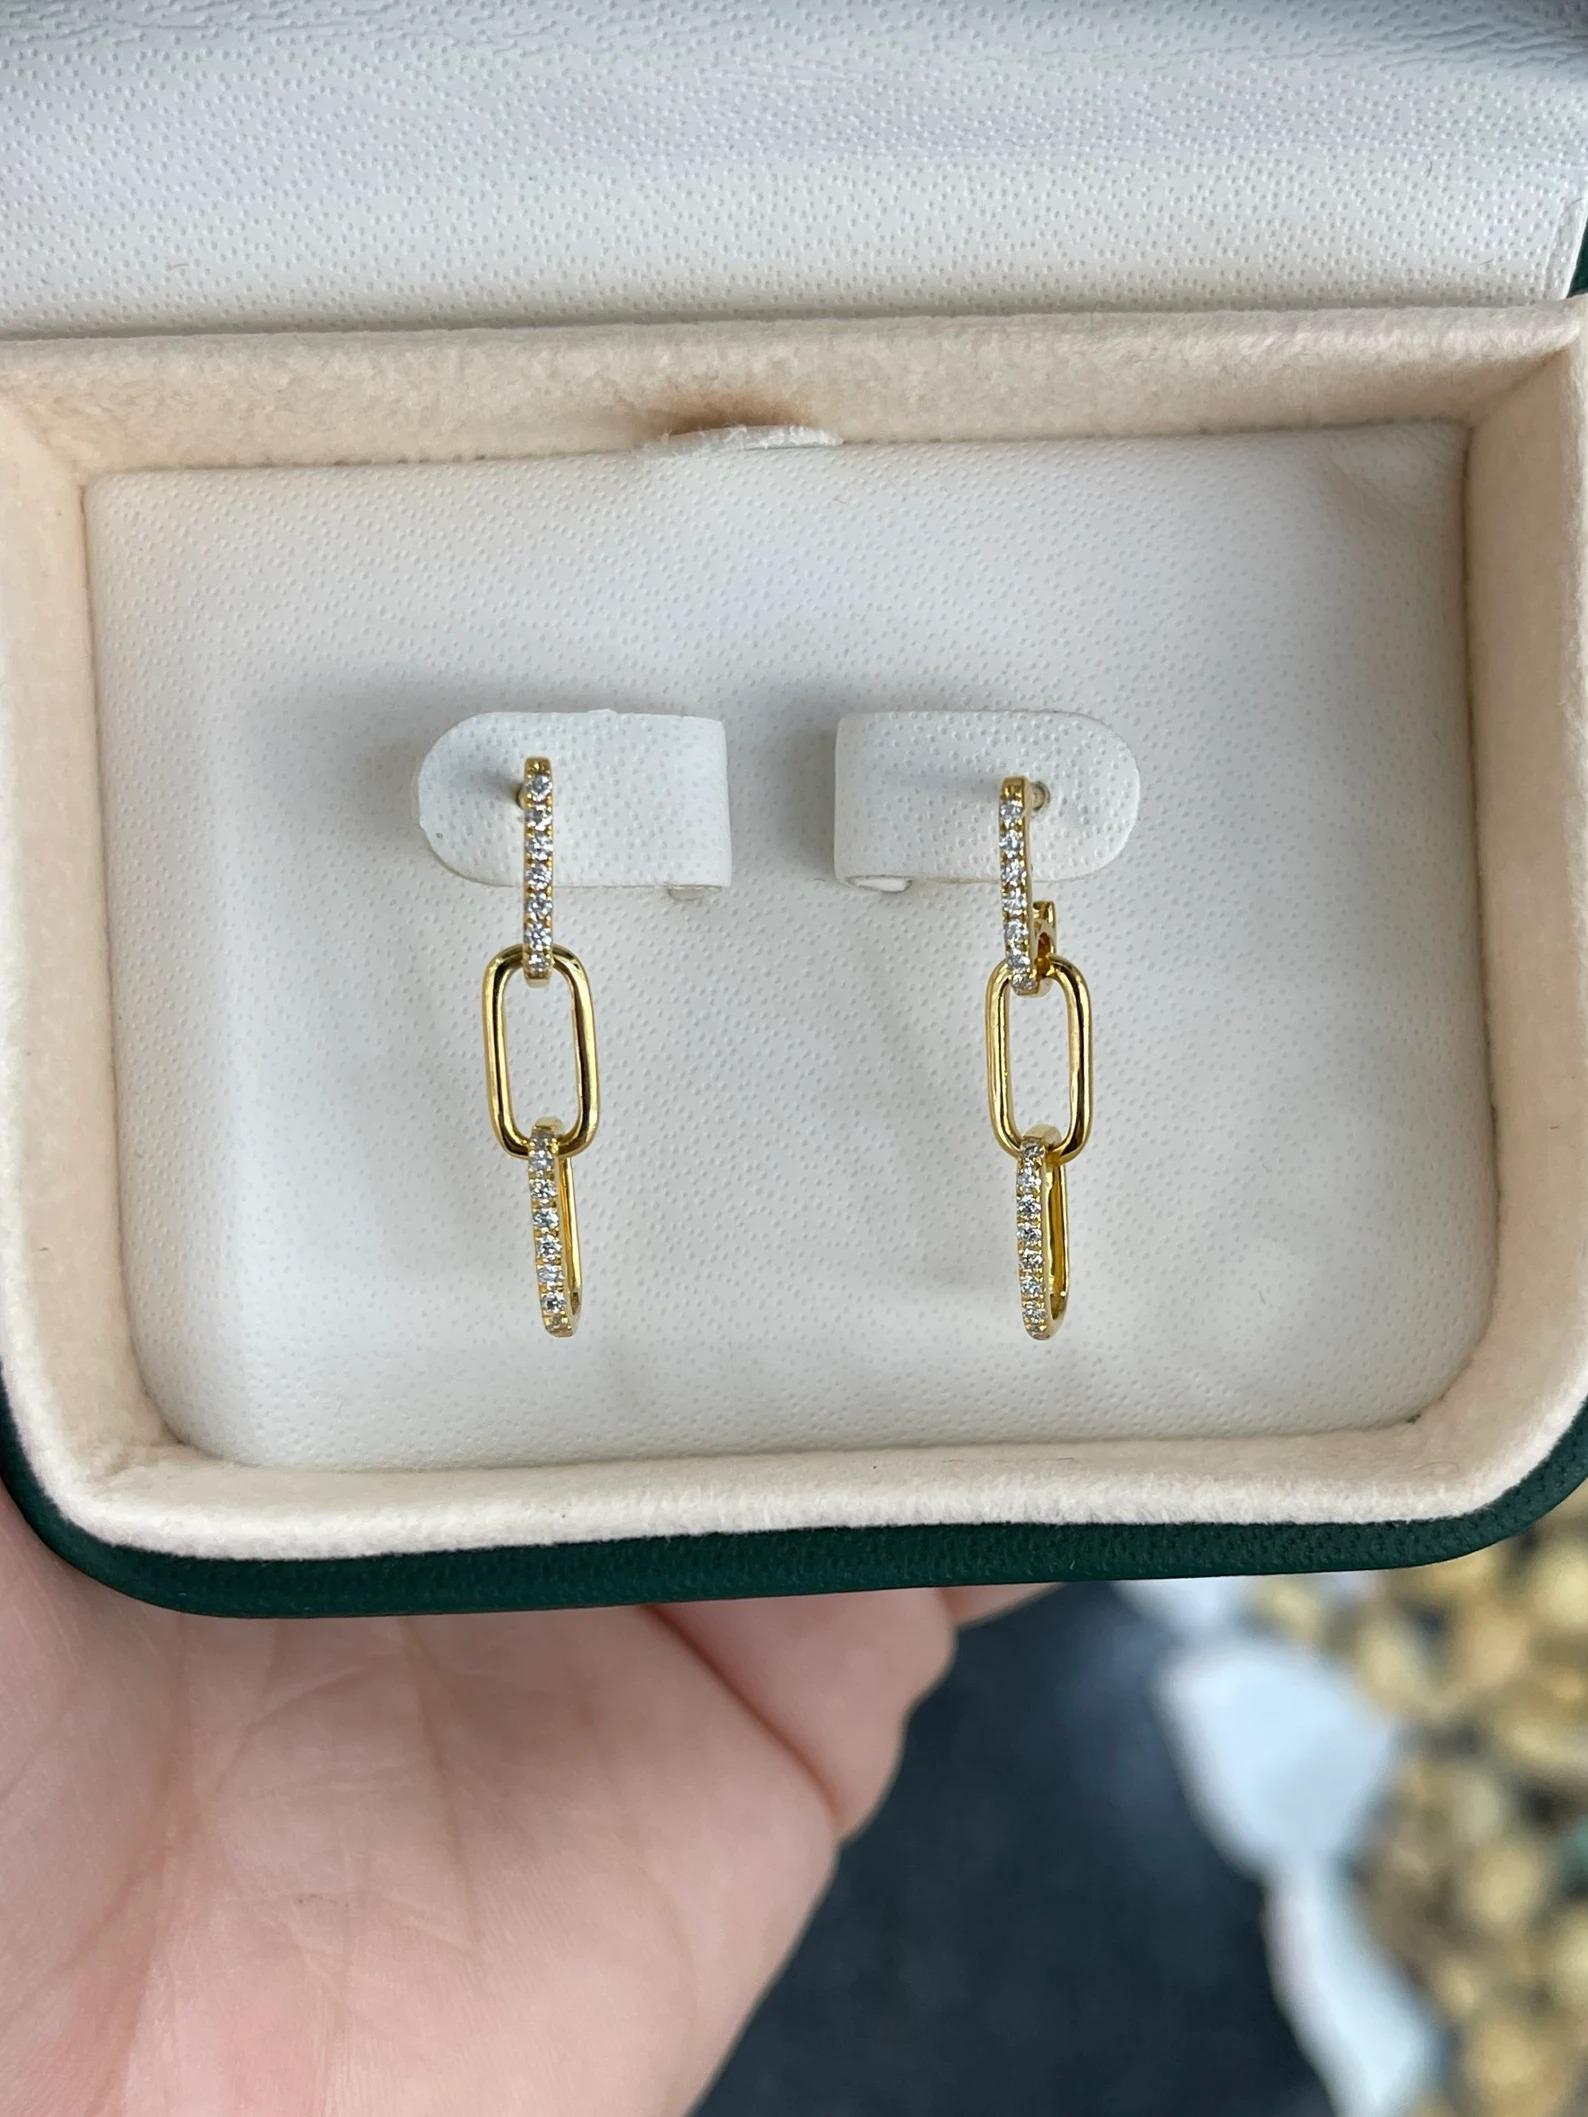 A cute and trendy pair of natural diamond paperclip dangle earrings. This gorgeous pair features three different clips, the top and bottom having diamond accents, and the middle of just gold. A quarter-carat of natural sparkly white diamonds bling